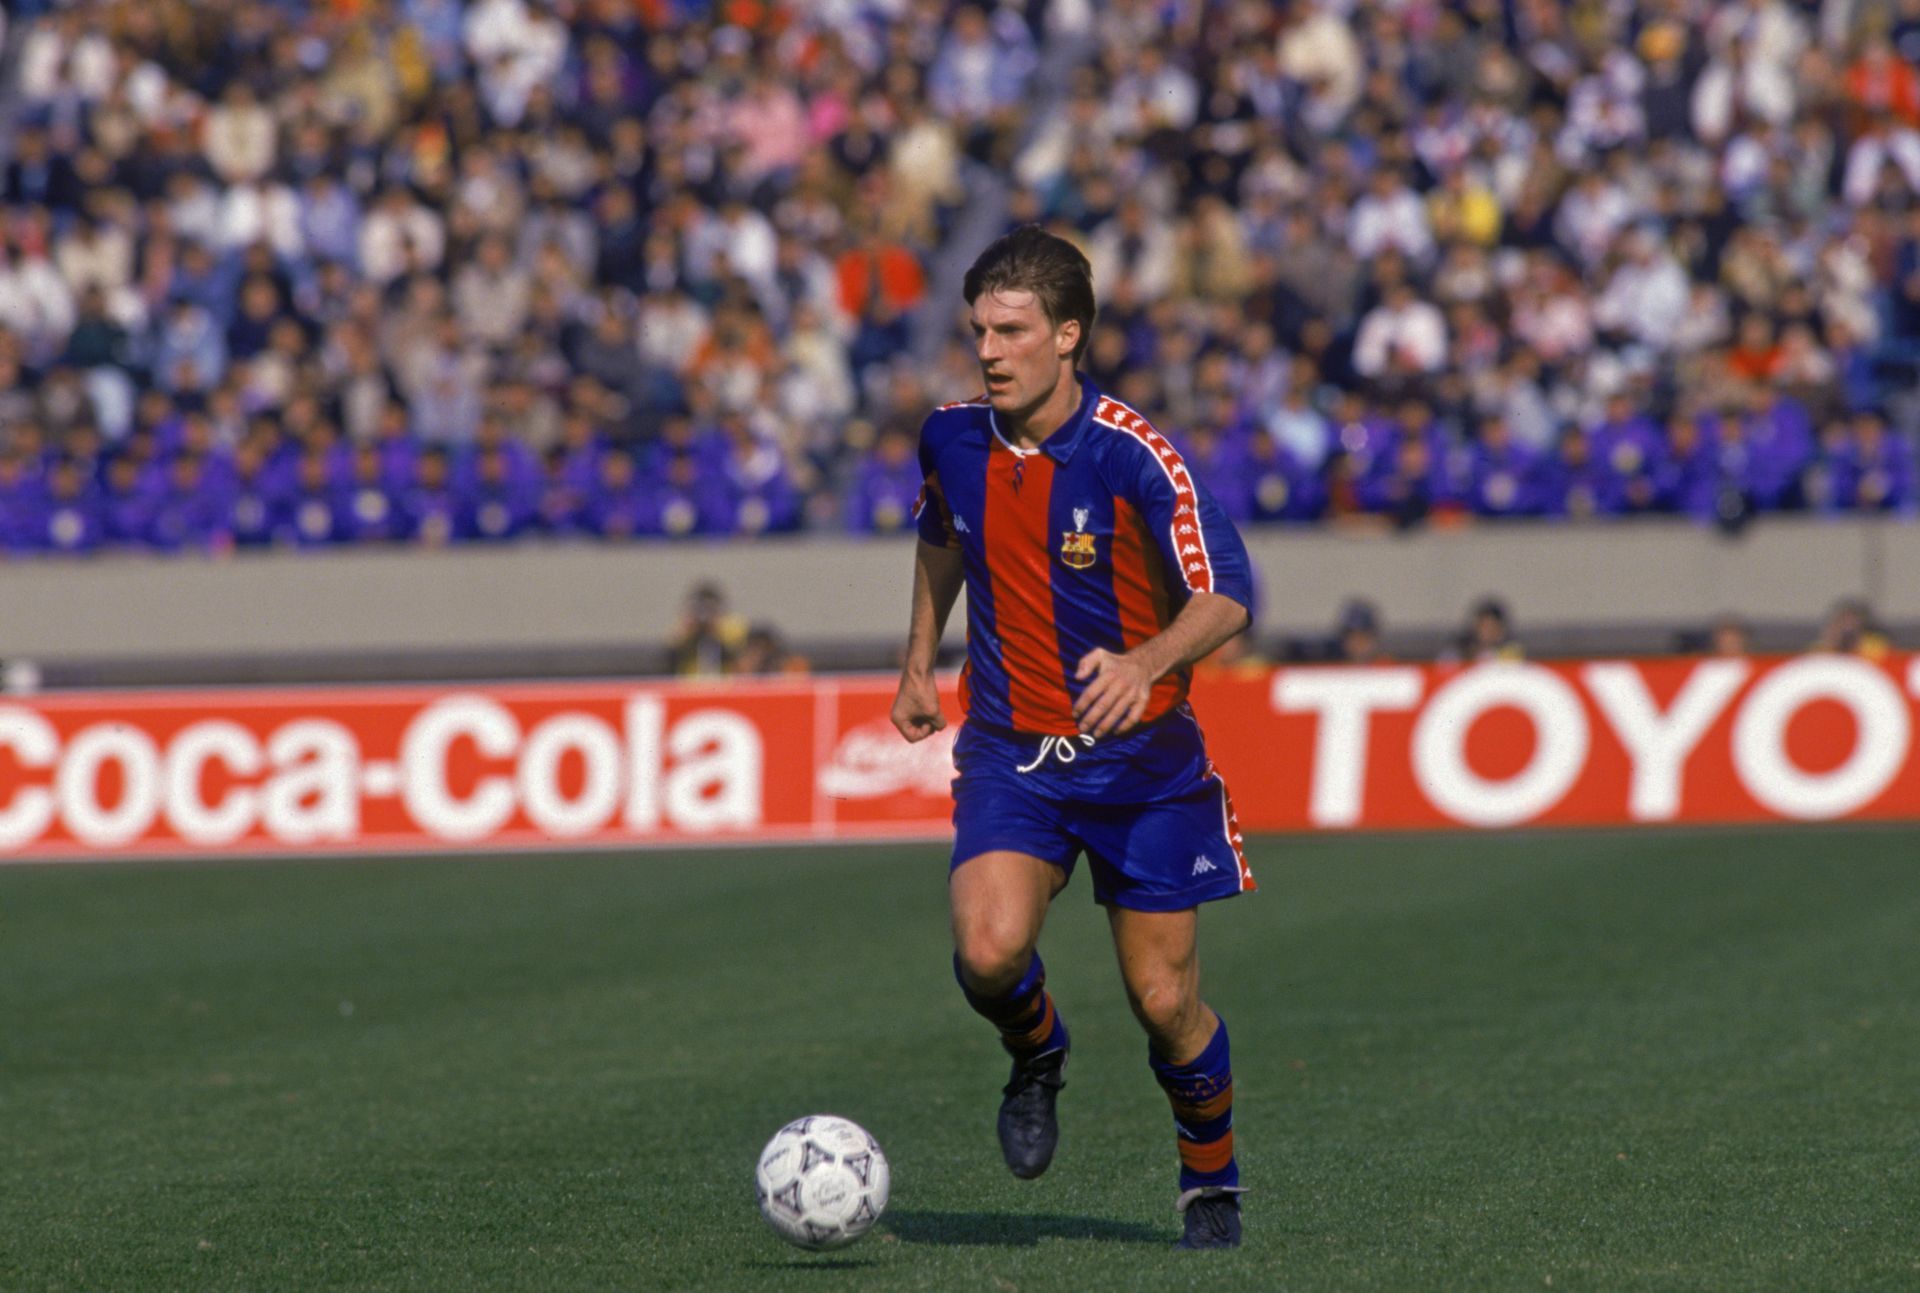 Michael Laudrup in action for Barcelona